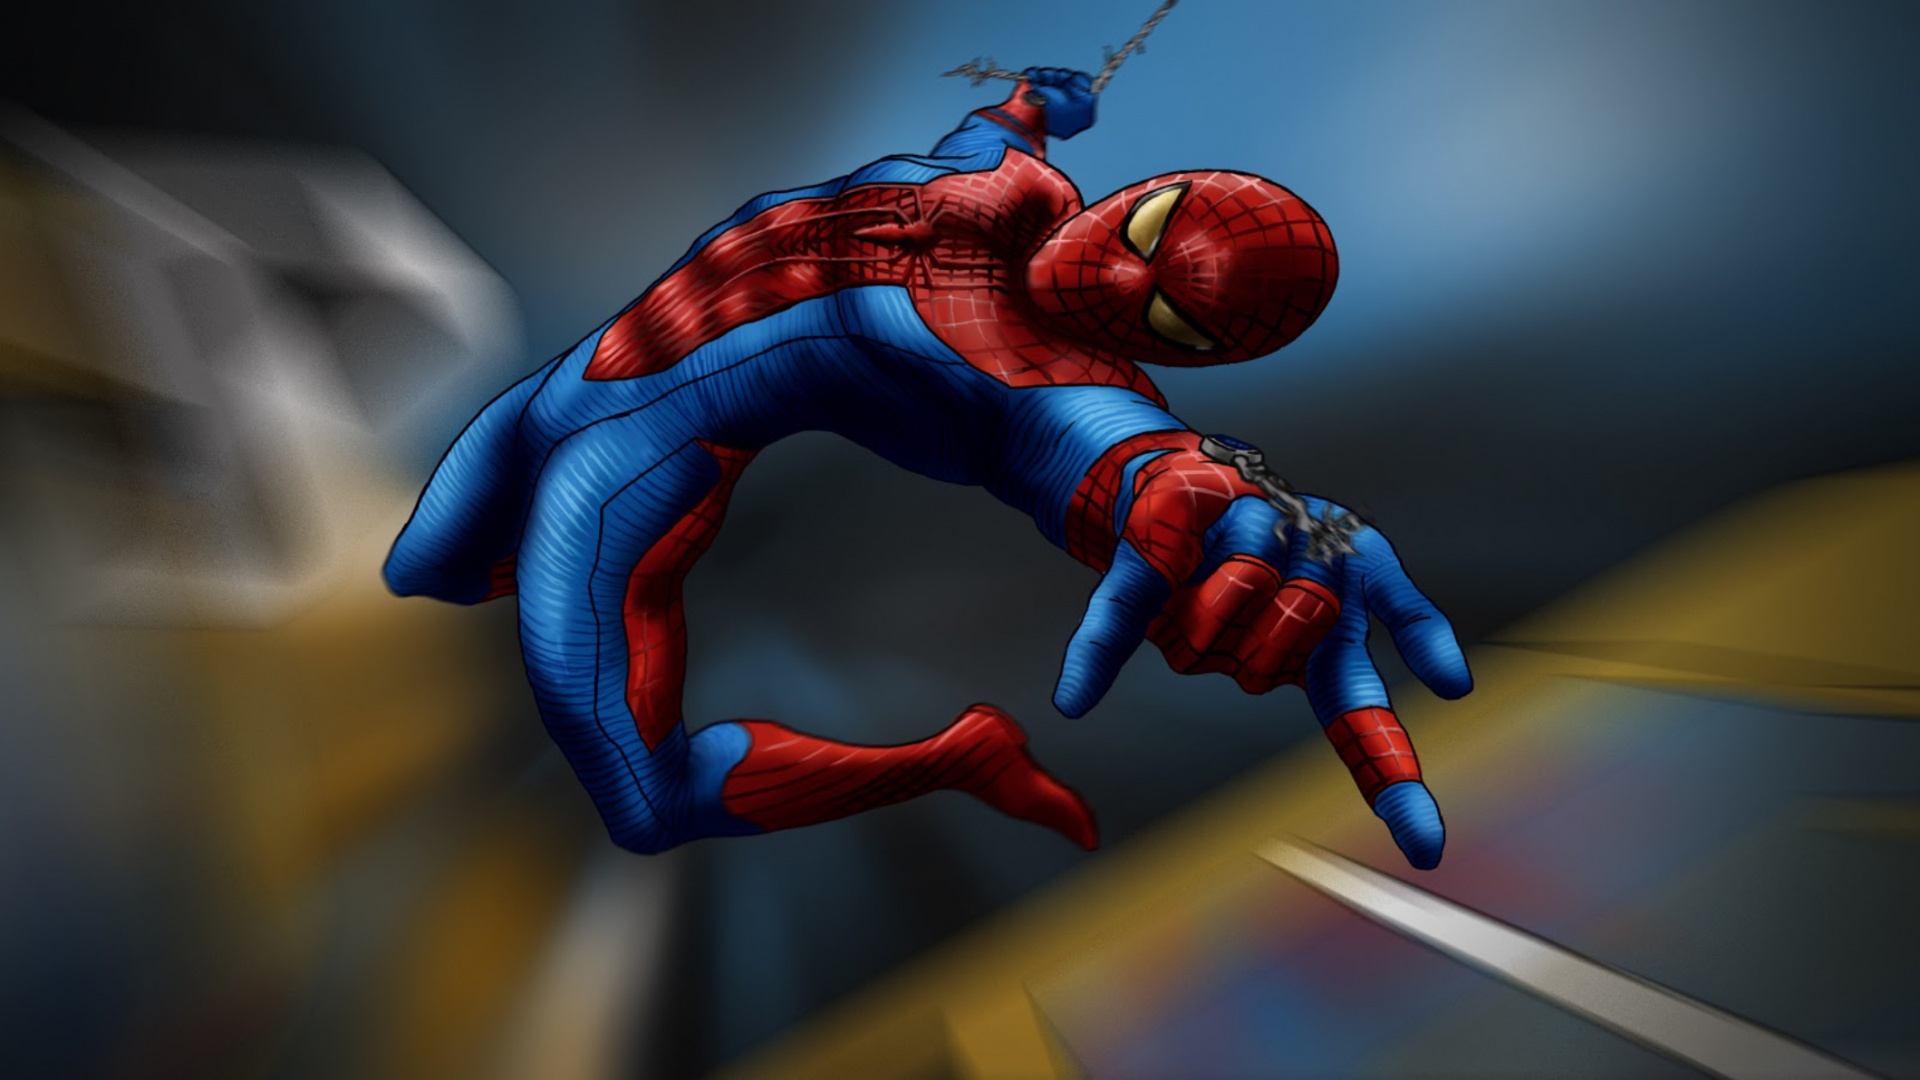 Red and Blue Spider Man Action Figure. Wallpaper in 1920x1080 Resolution